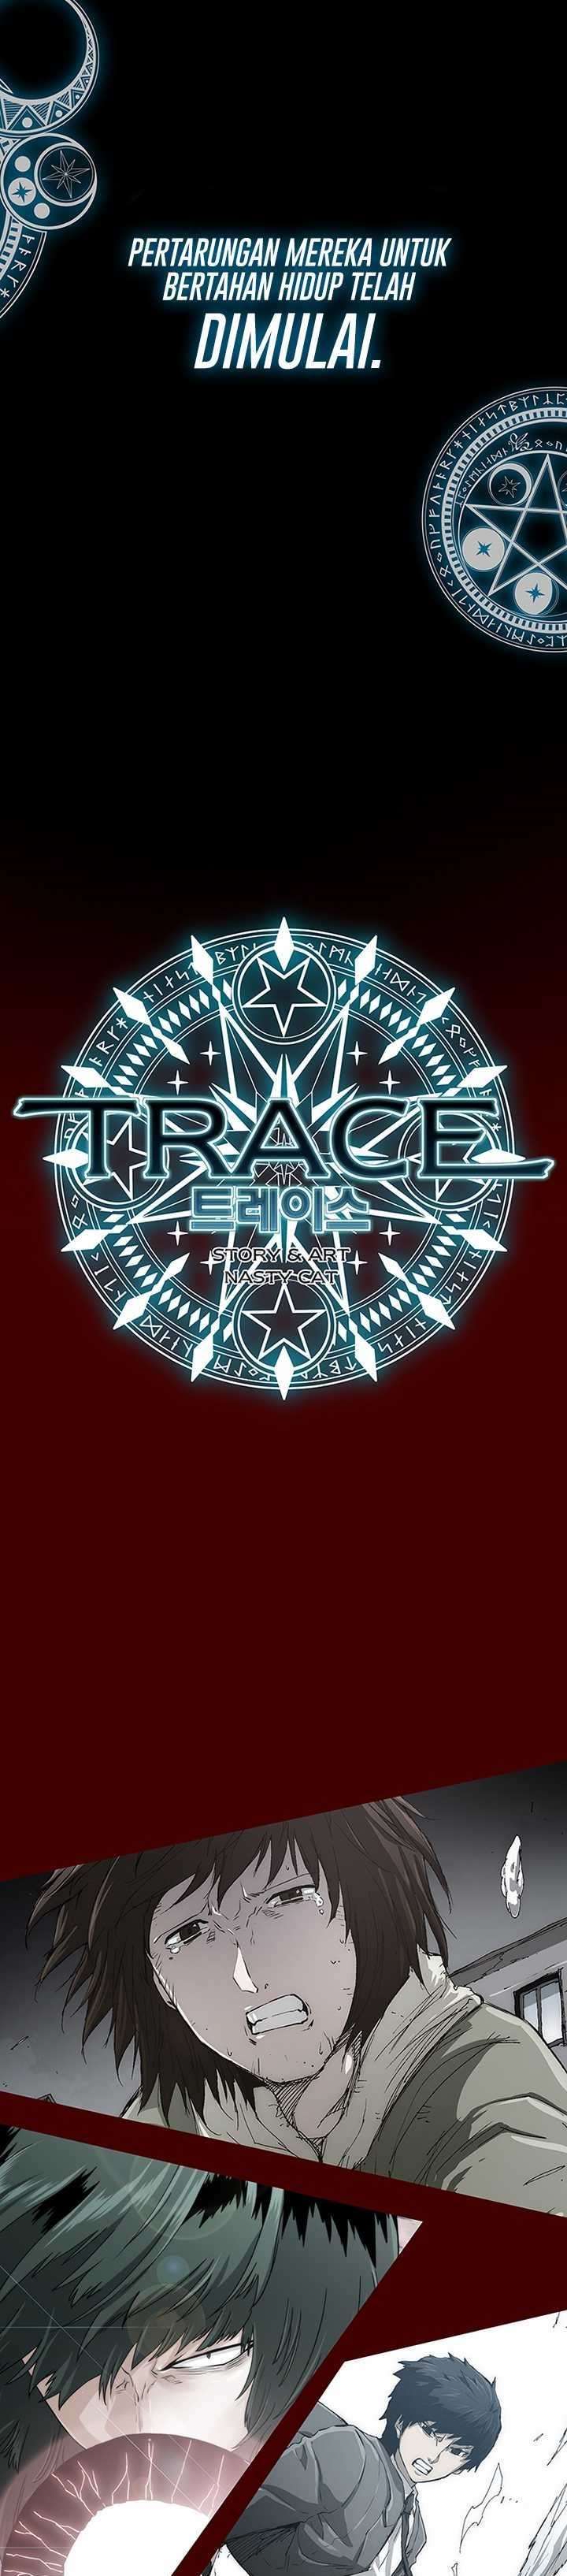 TRACE Remastered Chapter 00